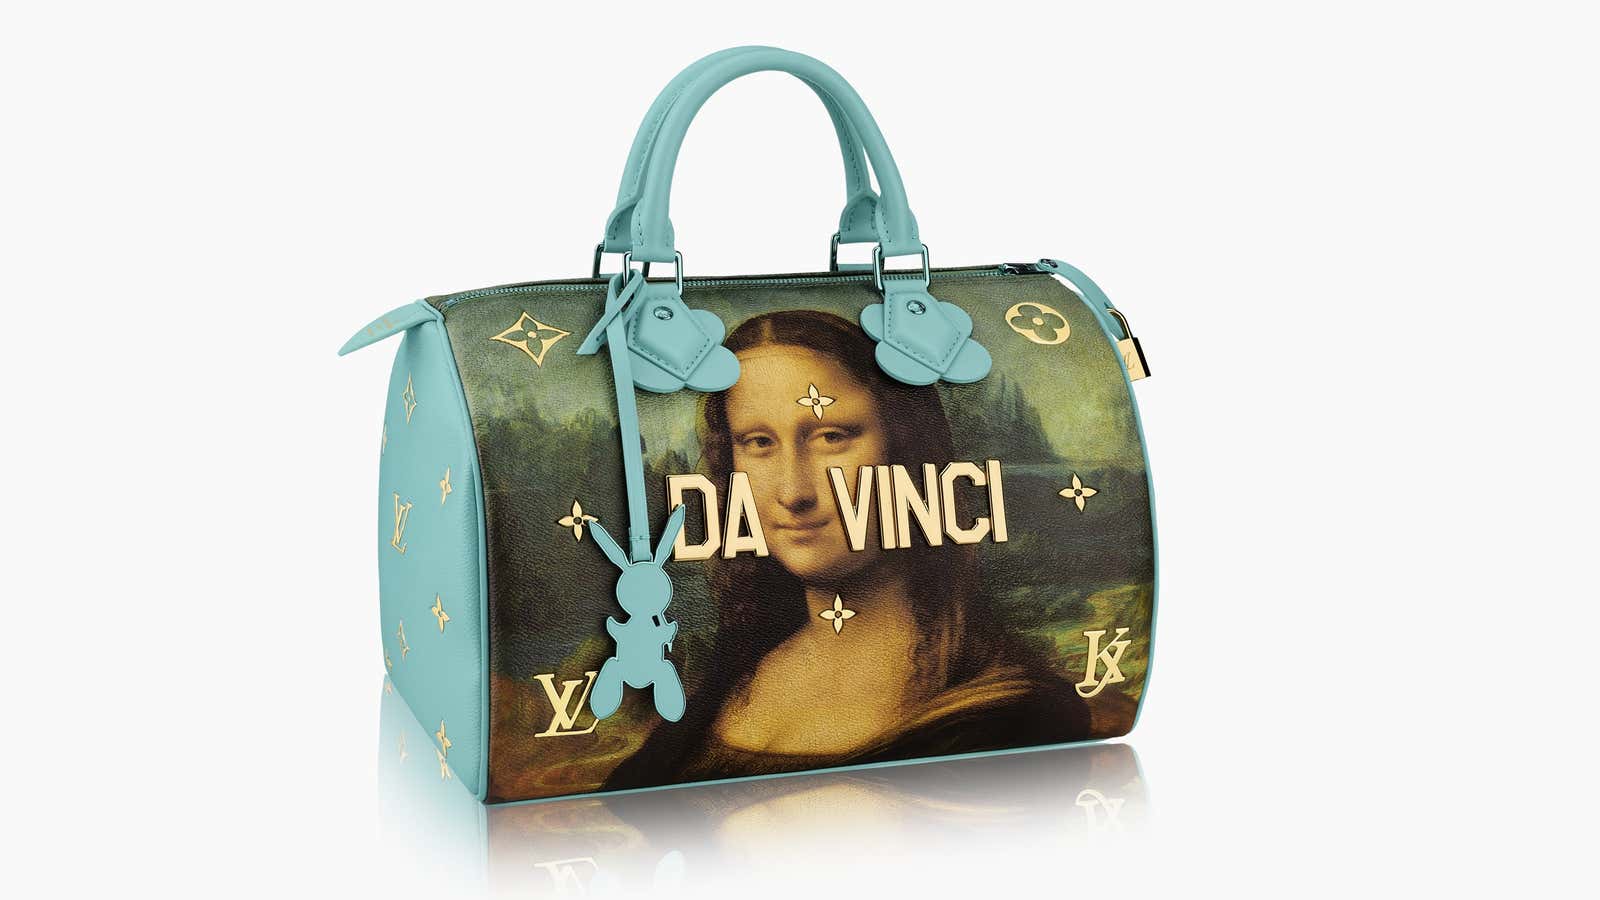 Louis Vuitton and Jeff Koons teamed up to make classic art “accessible”